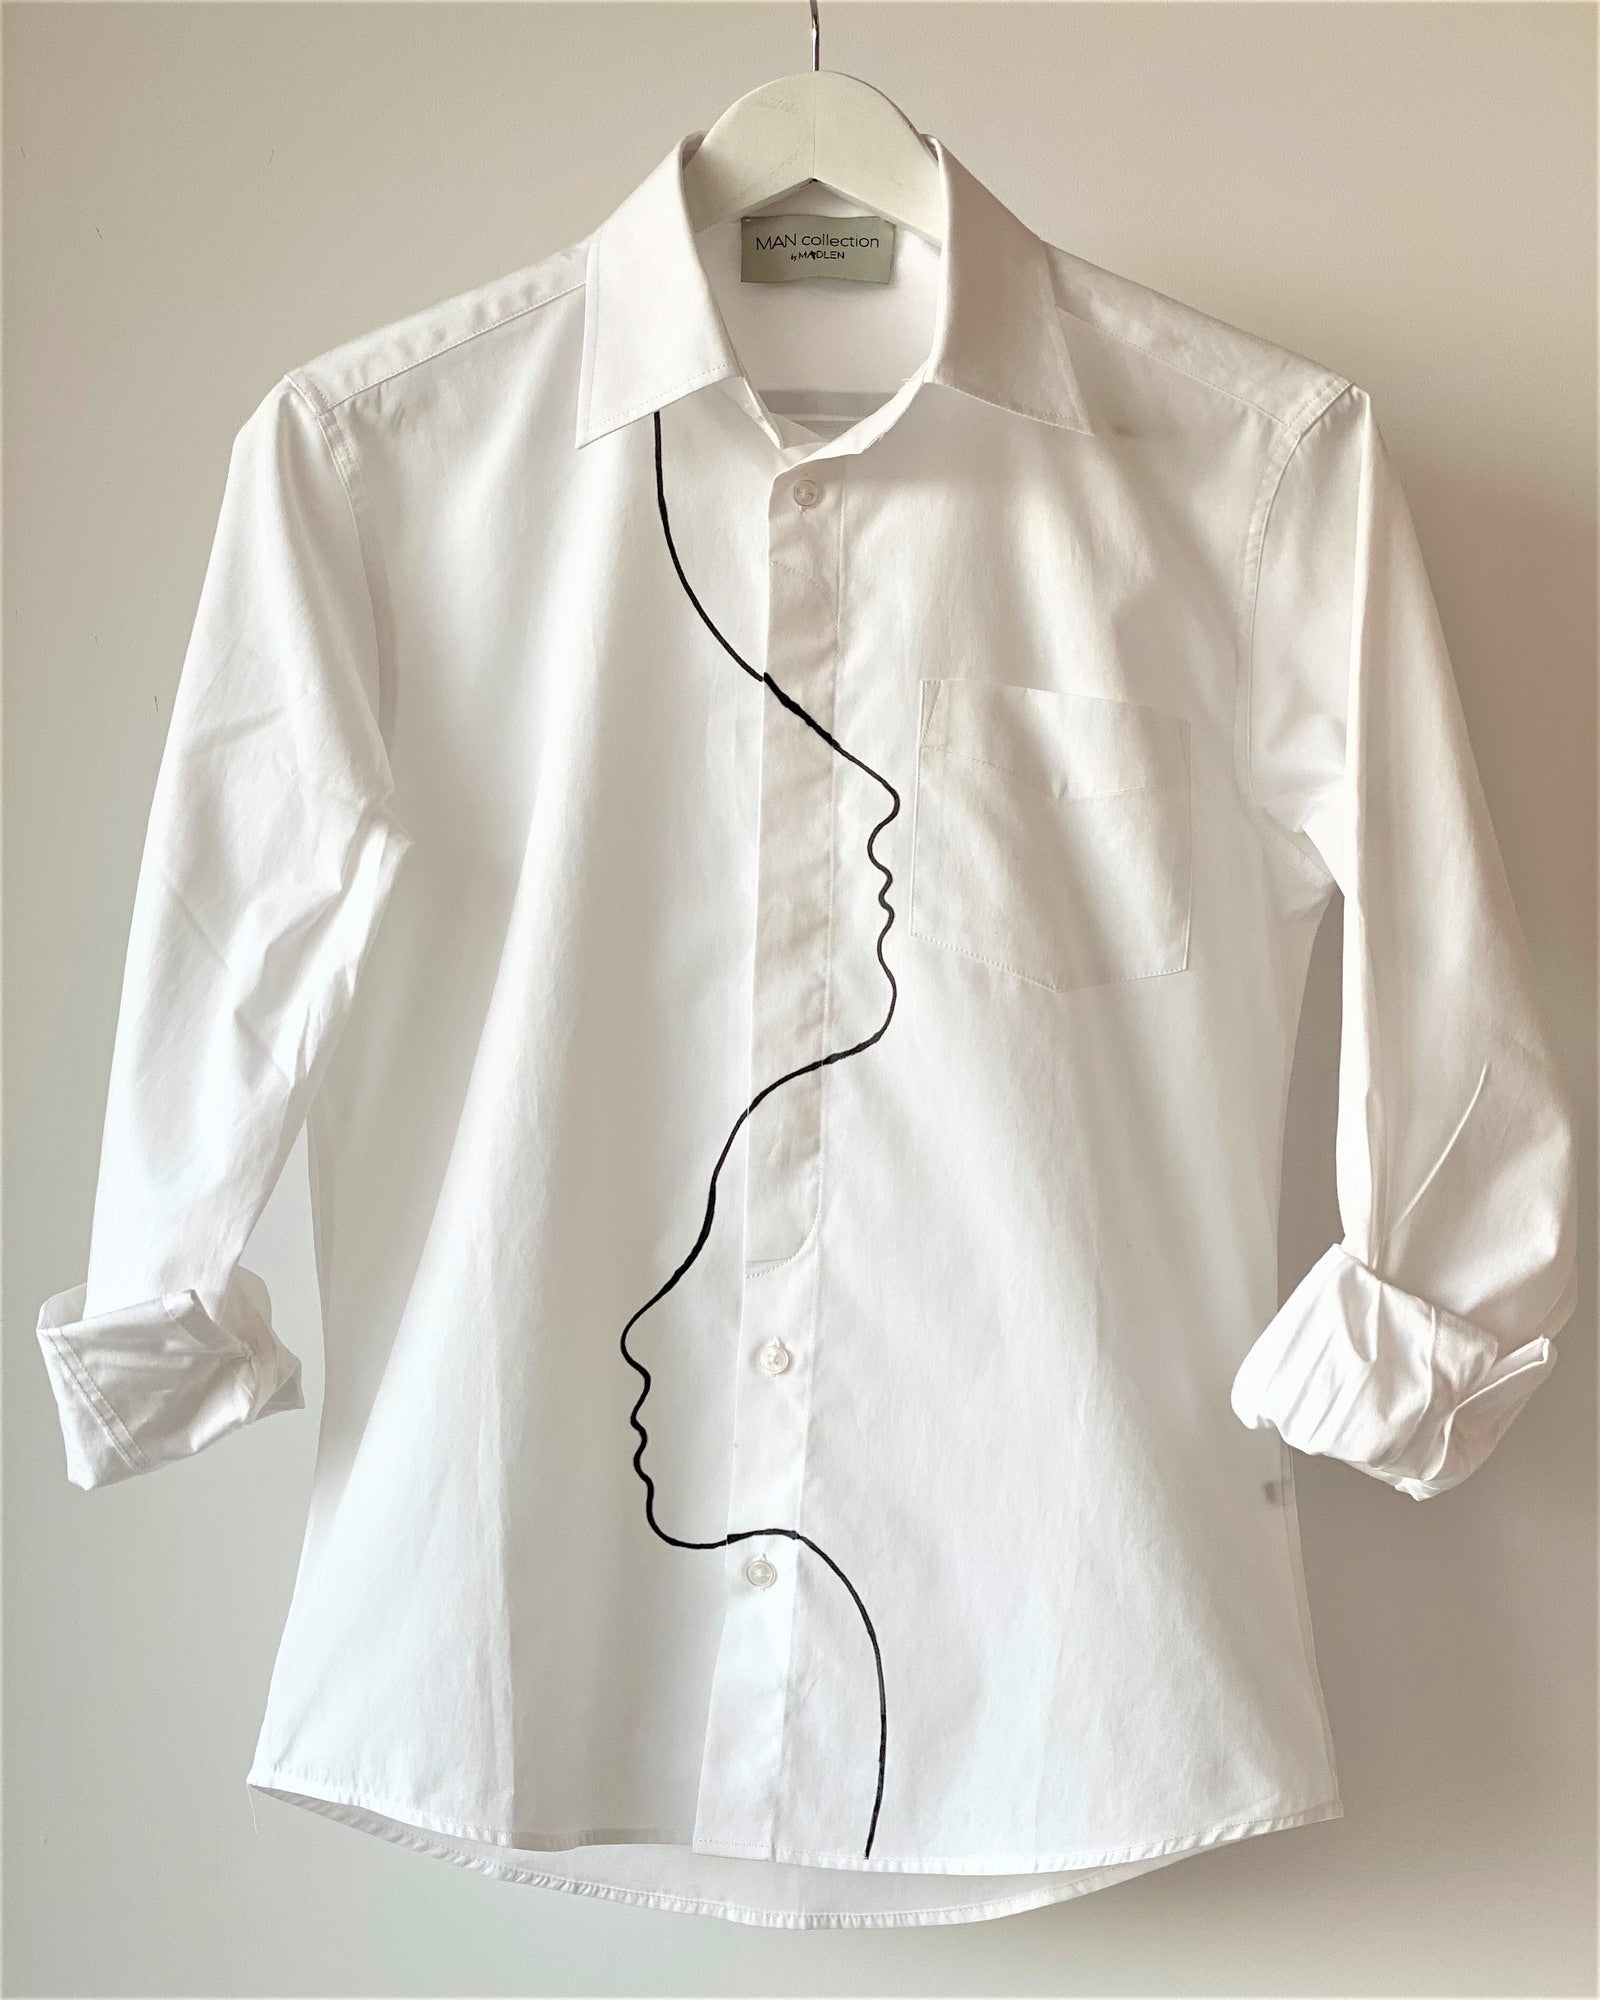 Hand-painted men's shirt "In profile"